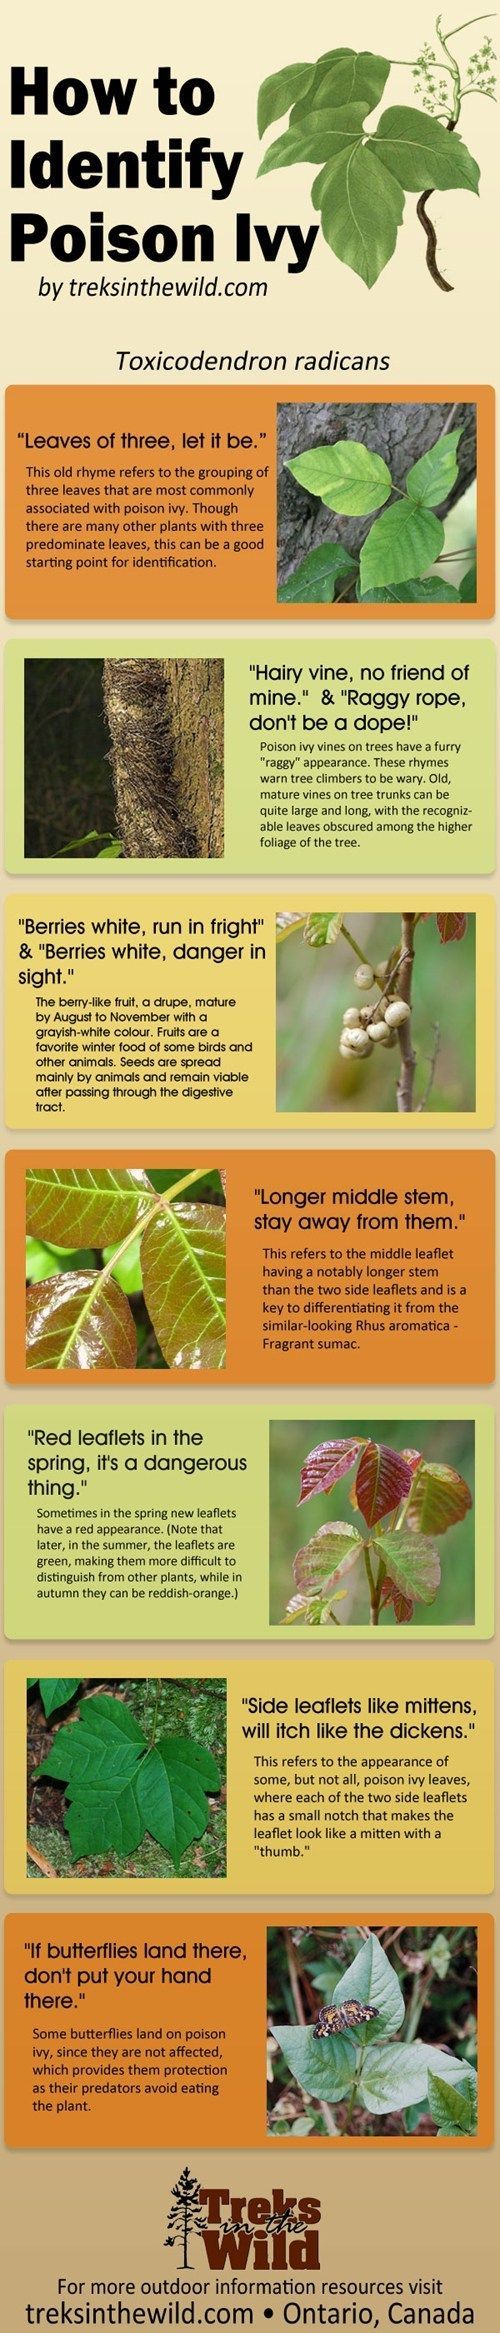 How to identify poison ivy. Useful for camping!